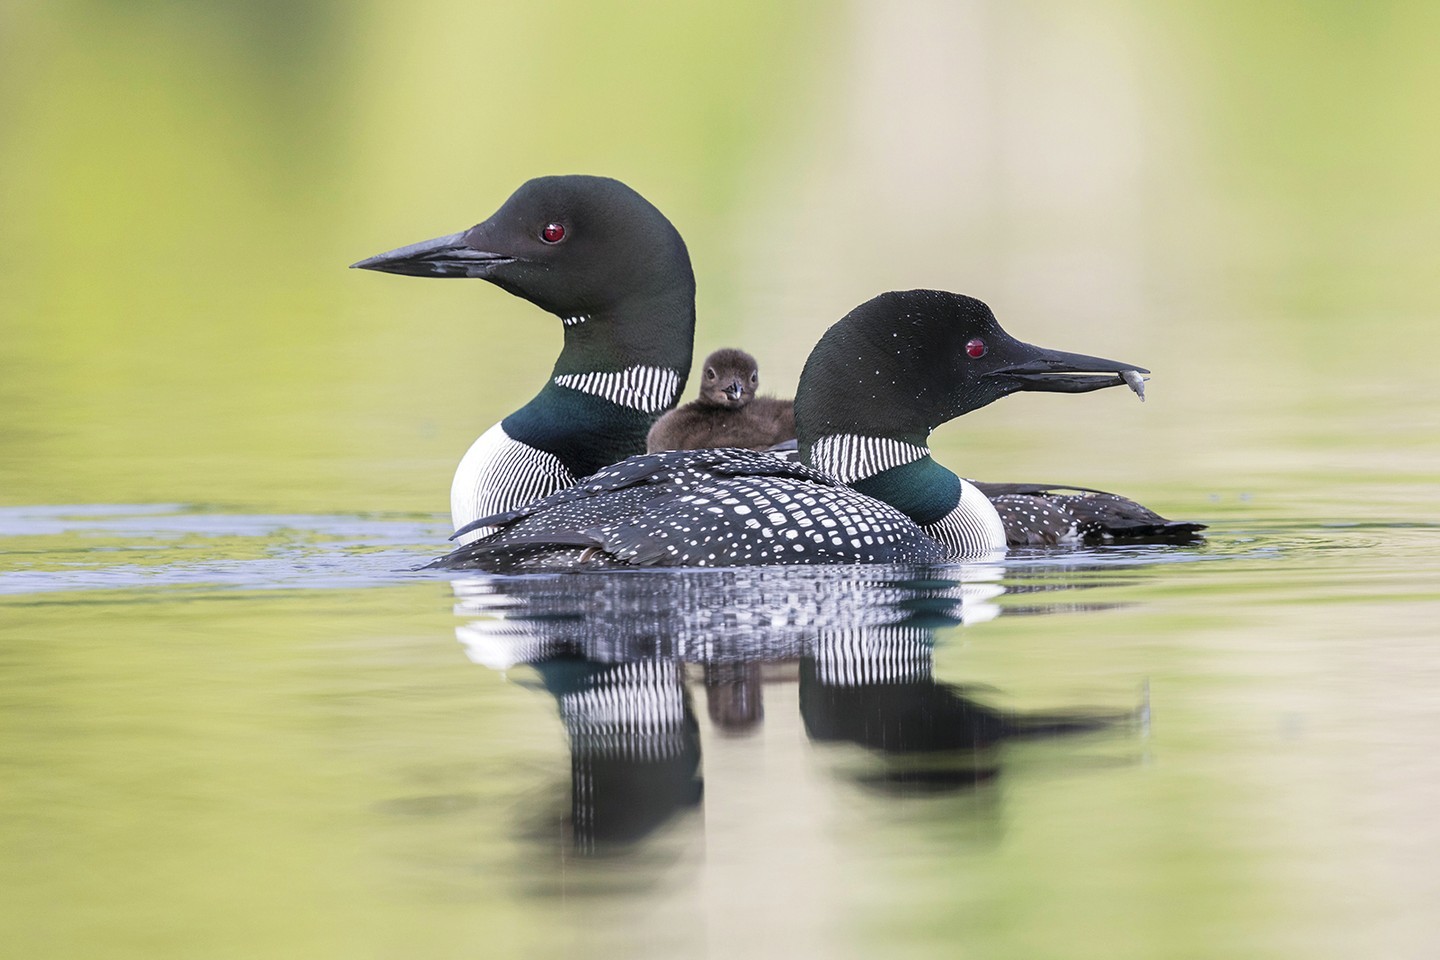 Today marks National Bird Day as we celebrate our state bird, the loon. We can care for birds and our wildlife by providing food, water and shelter as well as incorporating historically occurring plants in our landscapes. To learn more about caring for Minnesota and how to go Upstream, please visit our link in bio. PC: @minnesotamonthly..#goupstream #mnupstream #caringforplace — from Instagram